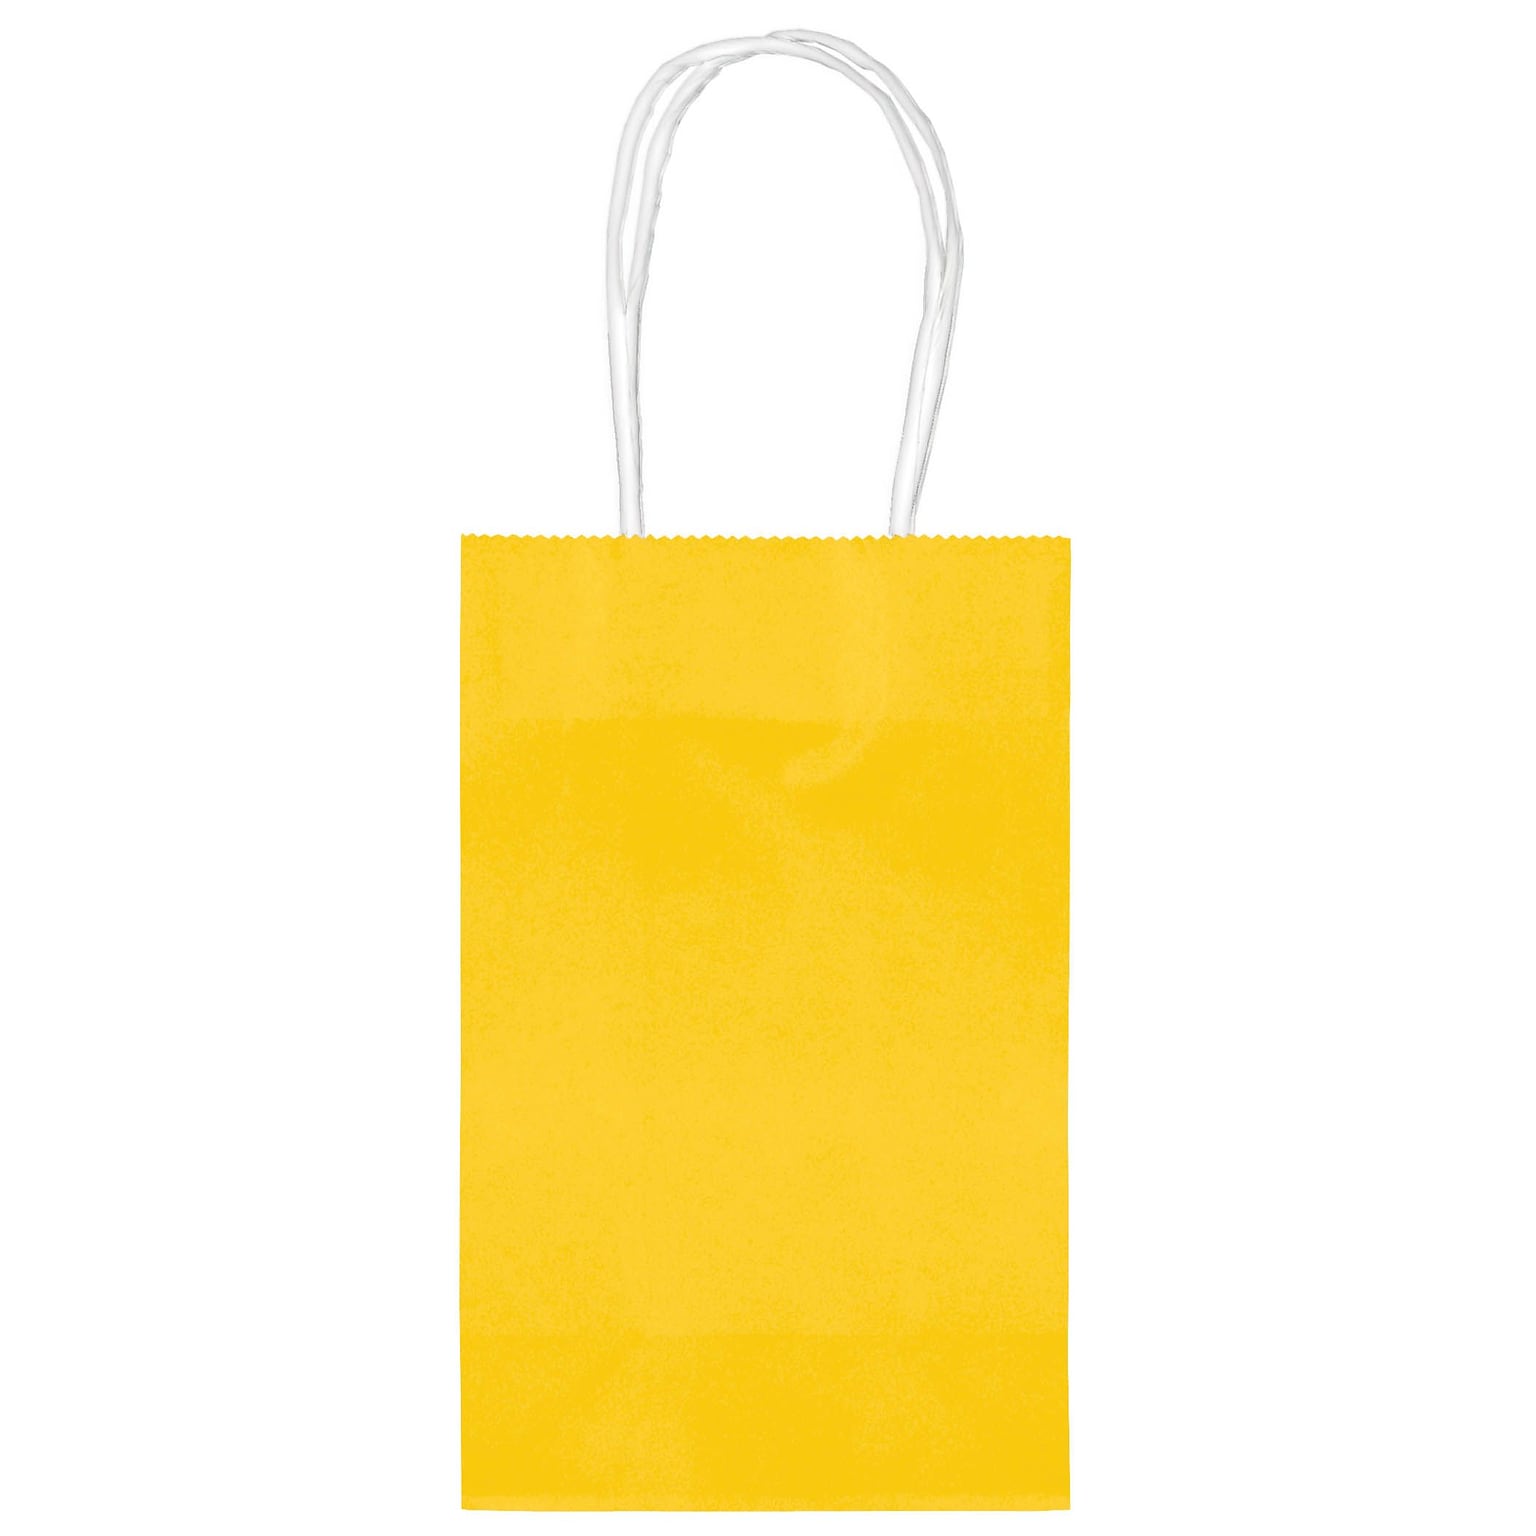 Amscan Cub Bags Value Pack, Sunshine Yellow, 4 Bags/Pack (162500.09)